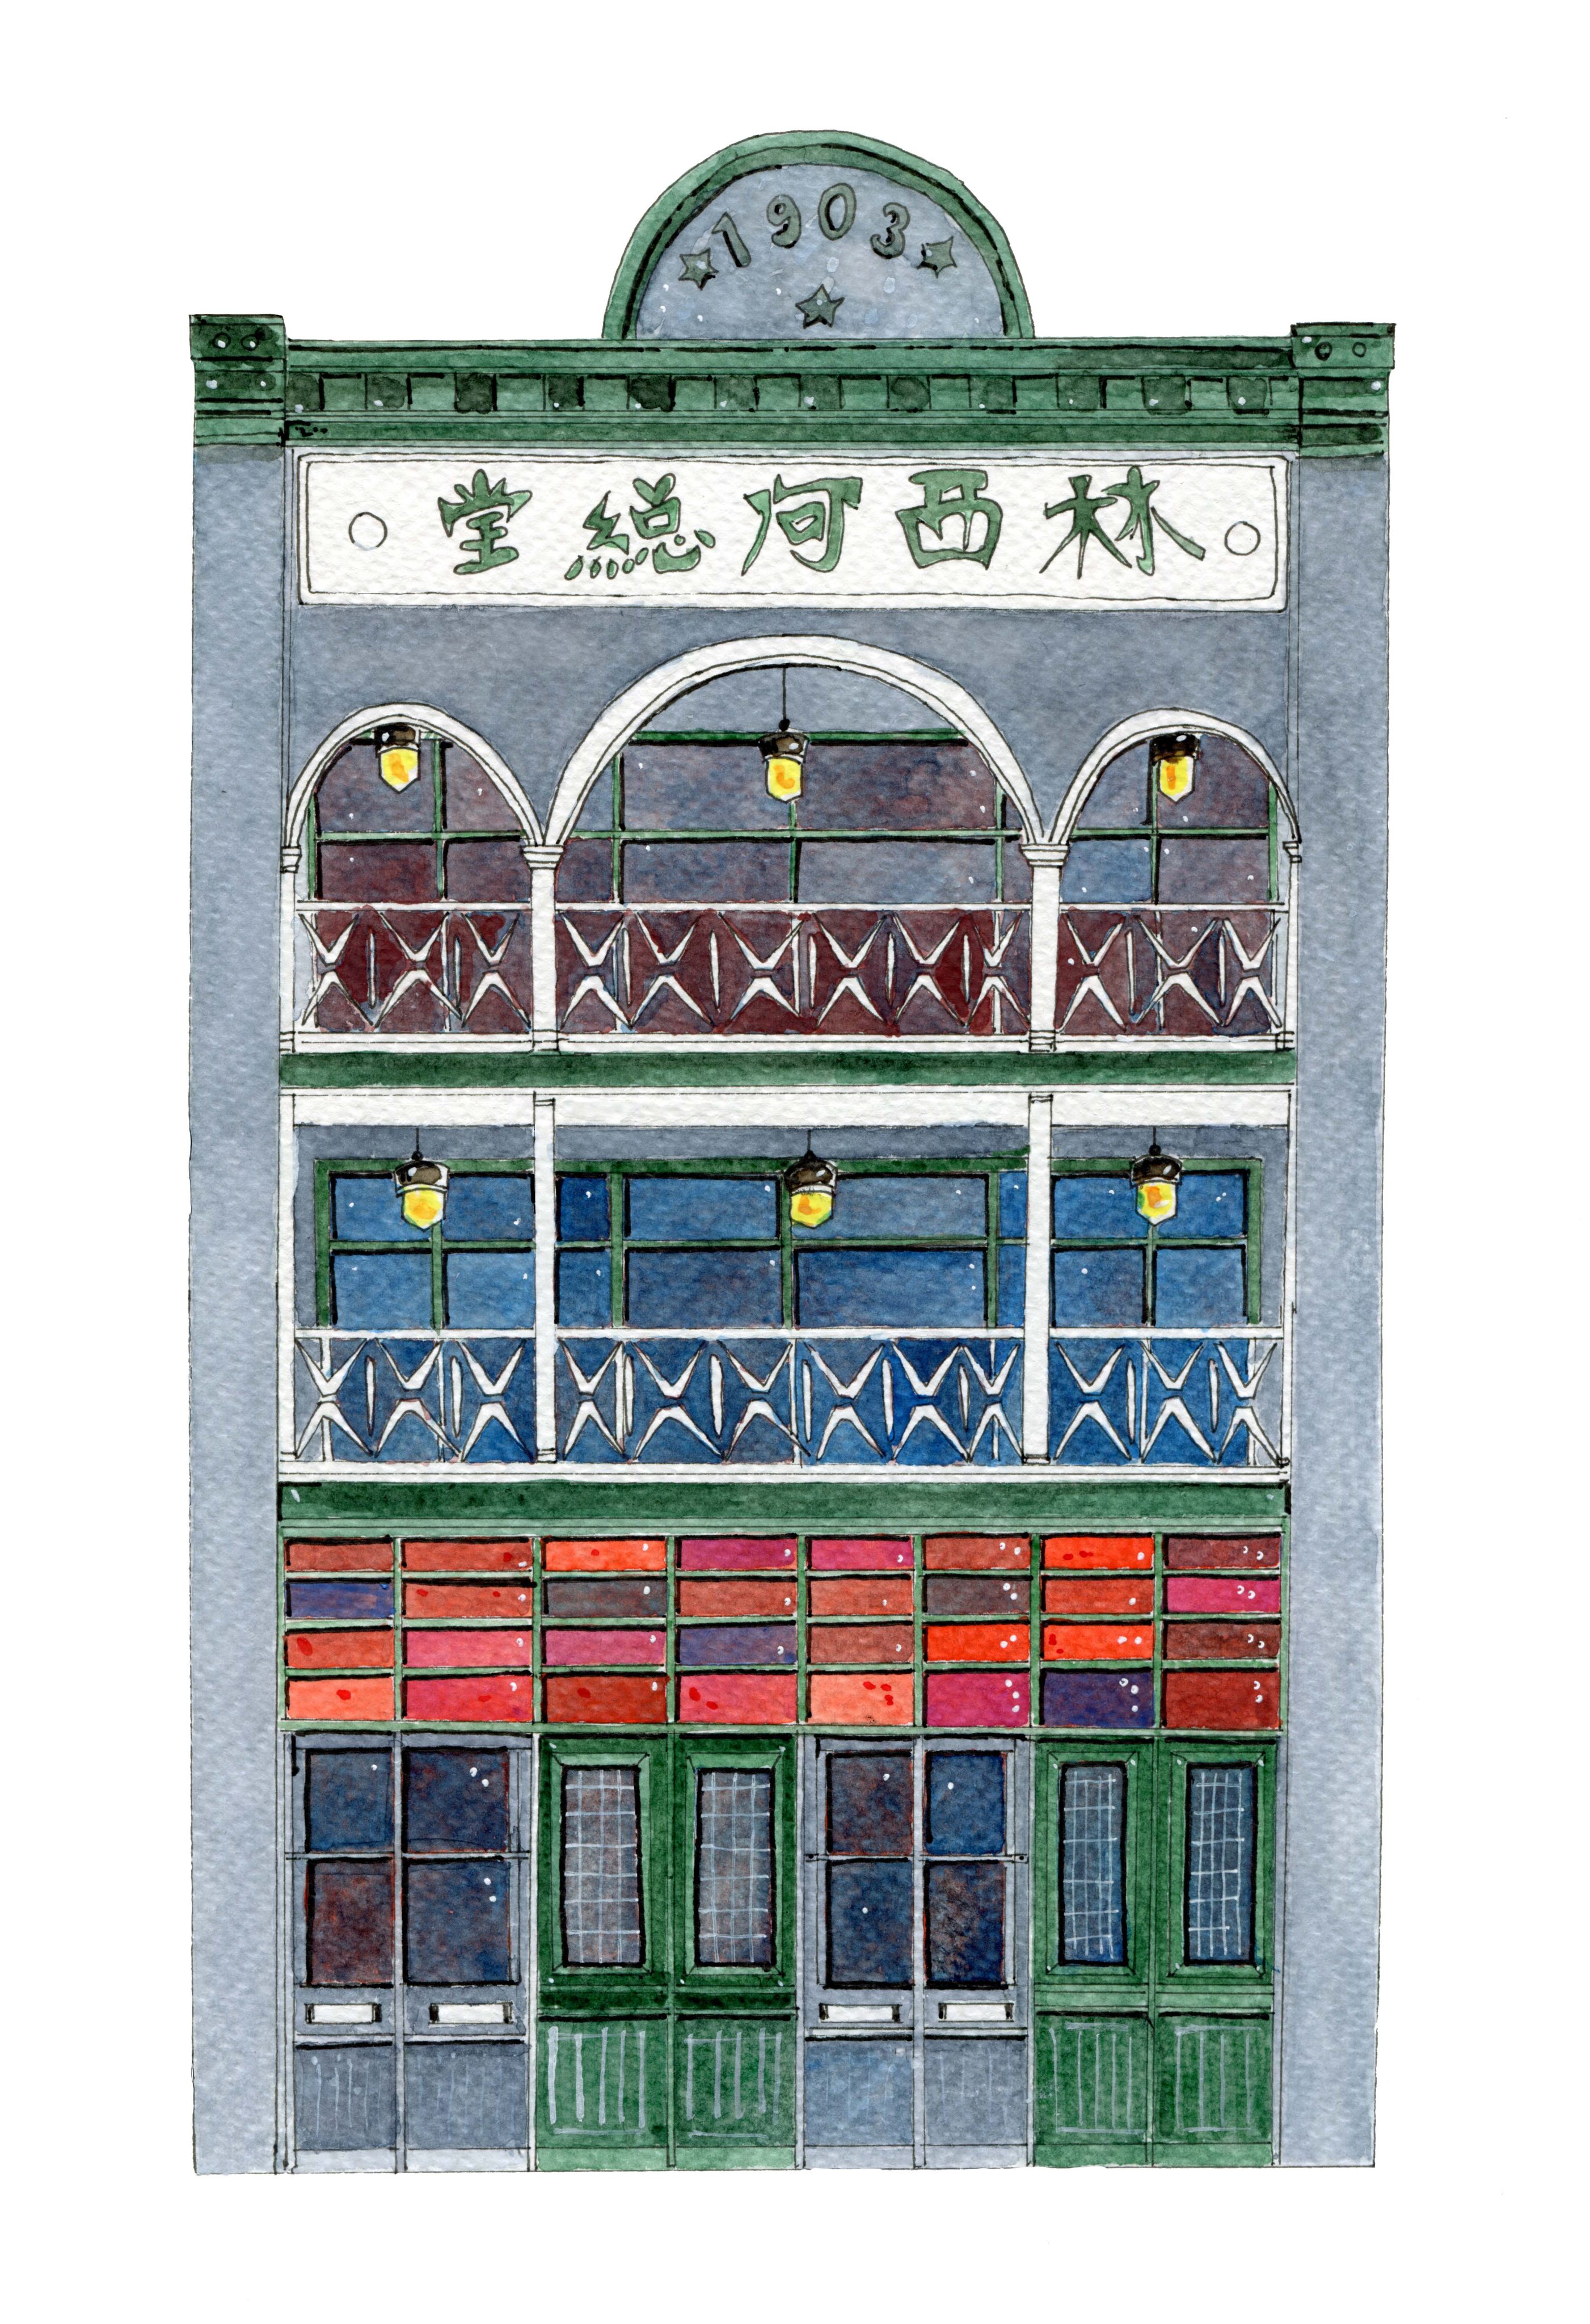 Detail from watercolourist Donna Seto’s painting  of the restored Empire Building in Vancouver’s Chinatown. Her work has triggered a wave of nostalgia as the historic area looks to bounce back from the Covid-19 pandemic. Photo: Donna Seto